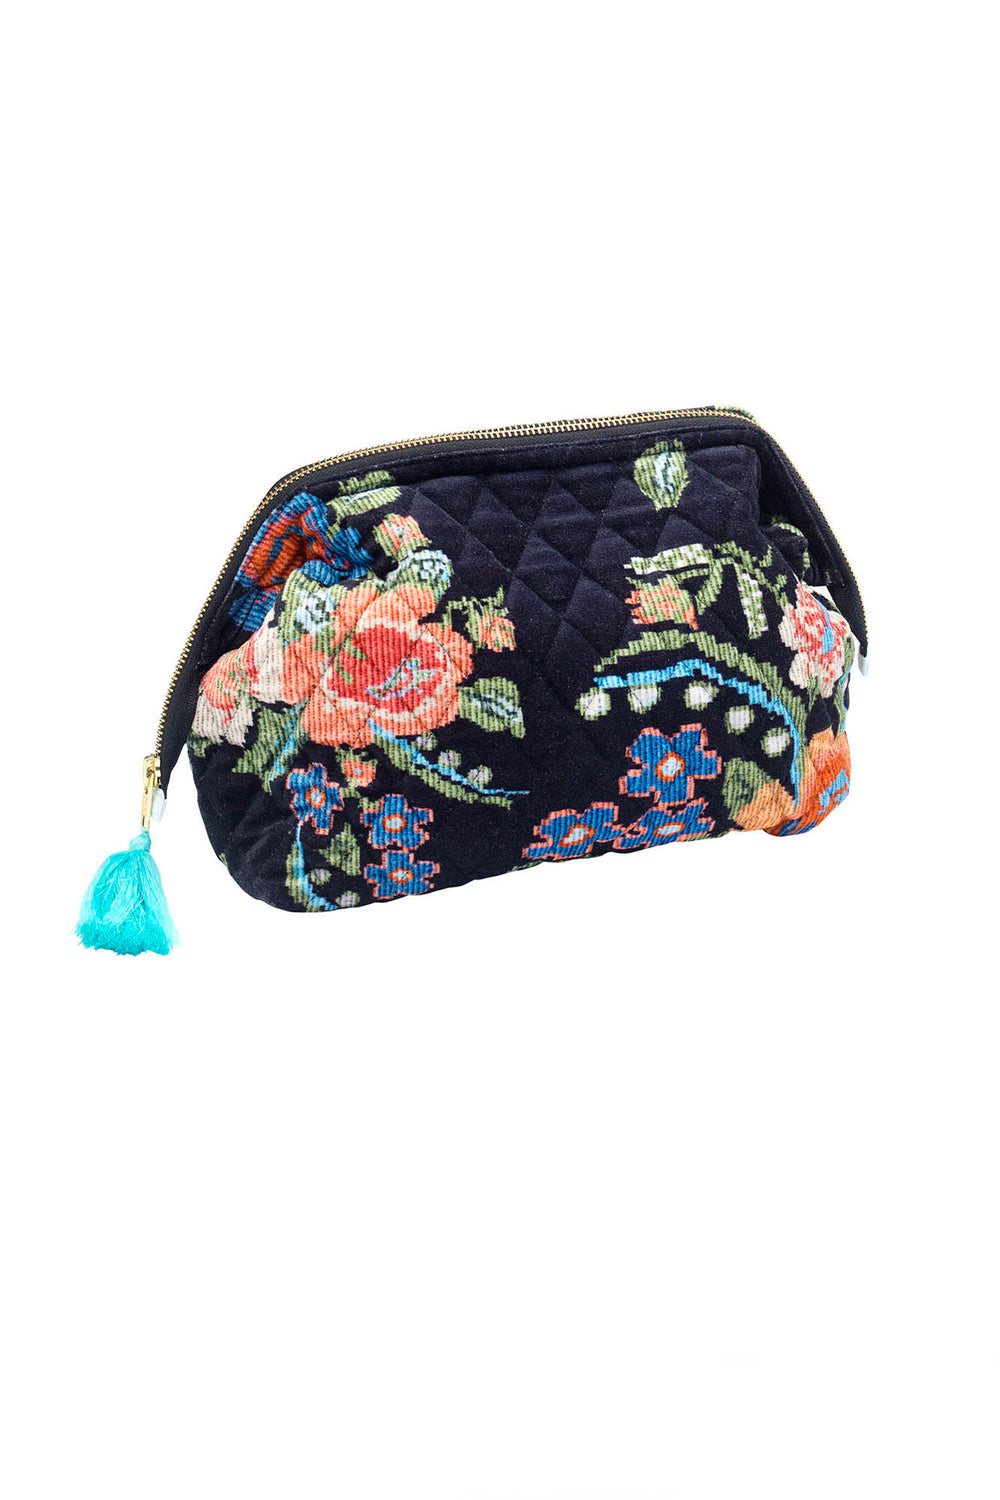 ladies velvet make-up clutch bag in woven flower print featuring colourful flowers on a black background by One Hundred Stars